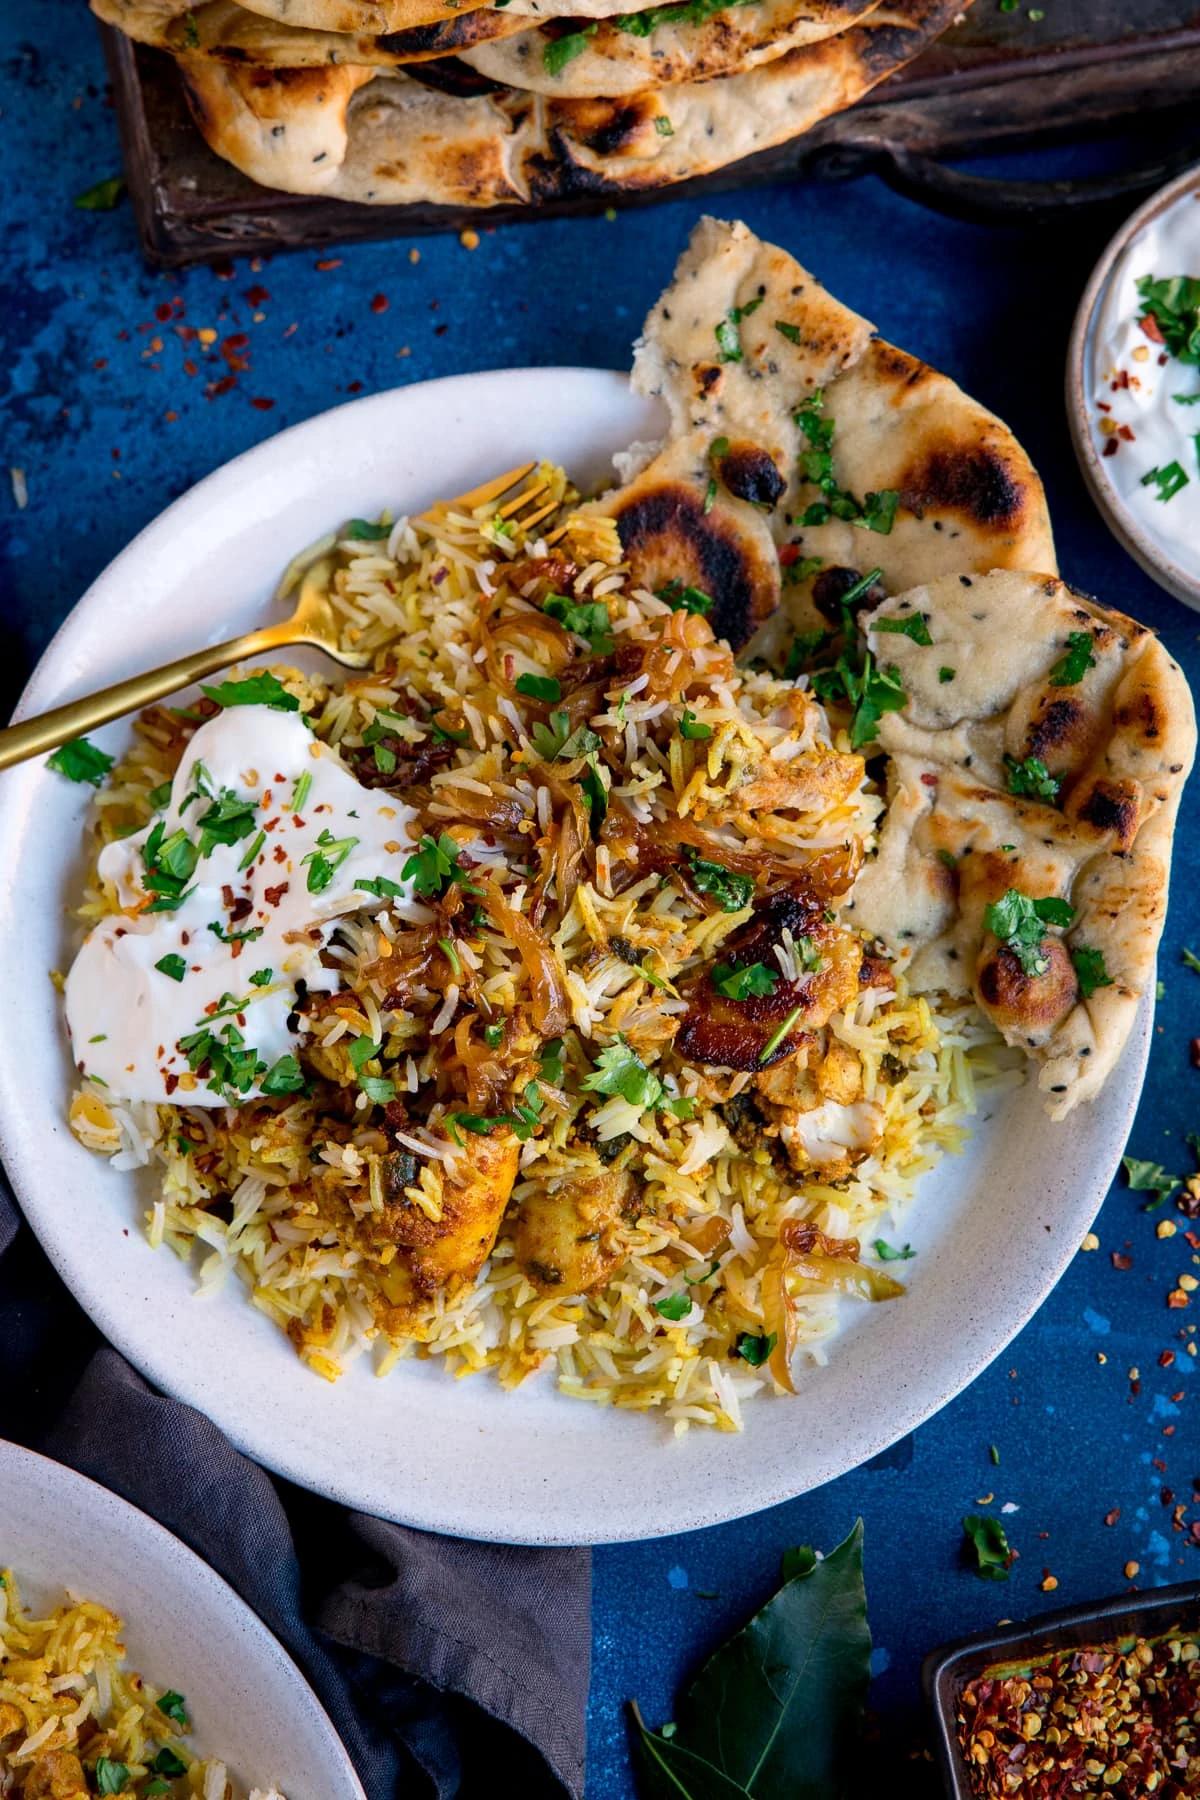 chicken biryani and natural yogurt on a plate with naan bread. Plate is on a blue background.